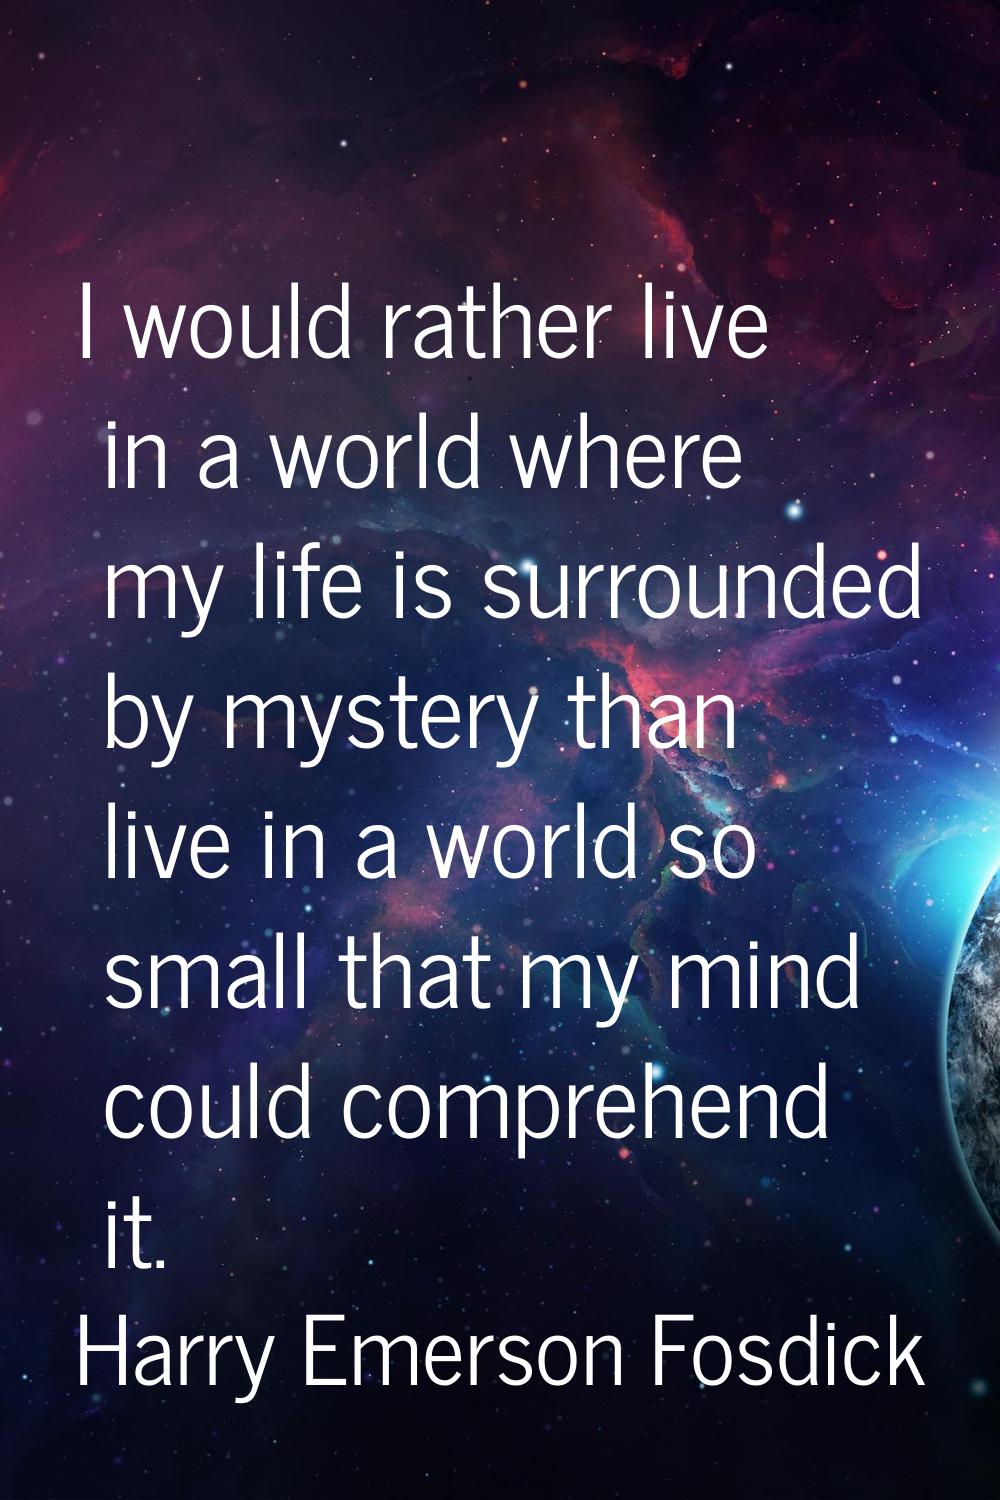 I would rather live in a world where my life is surrounded by mystery than live in a world so small